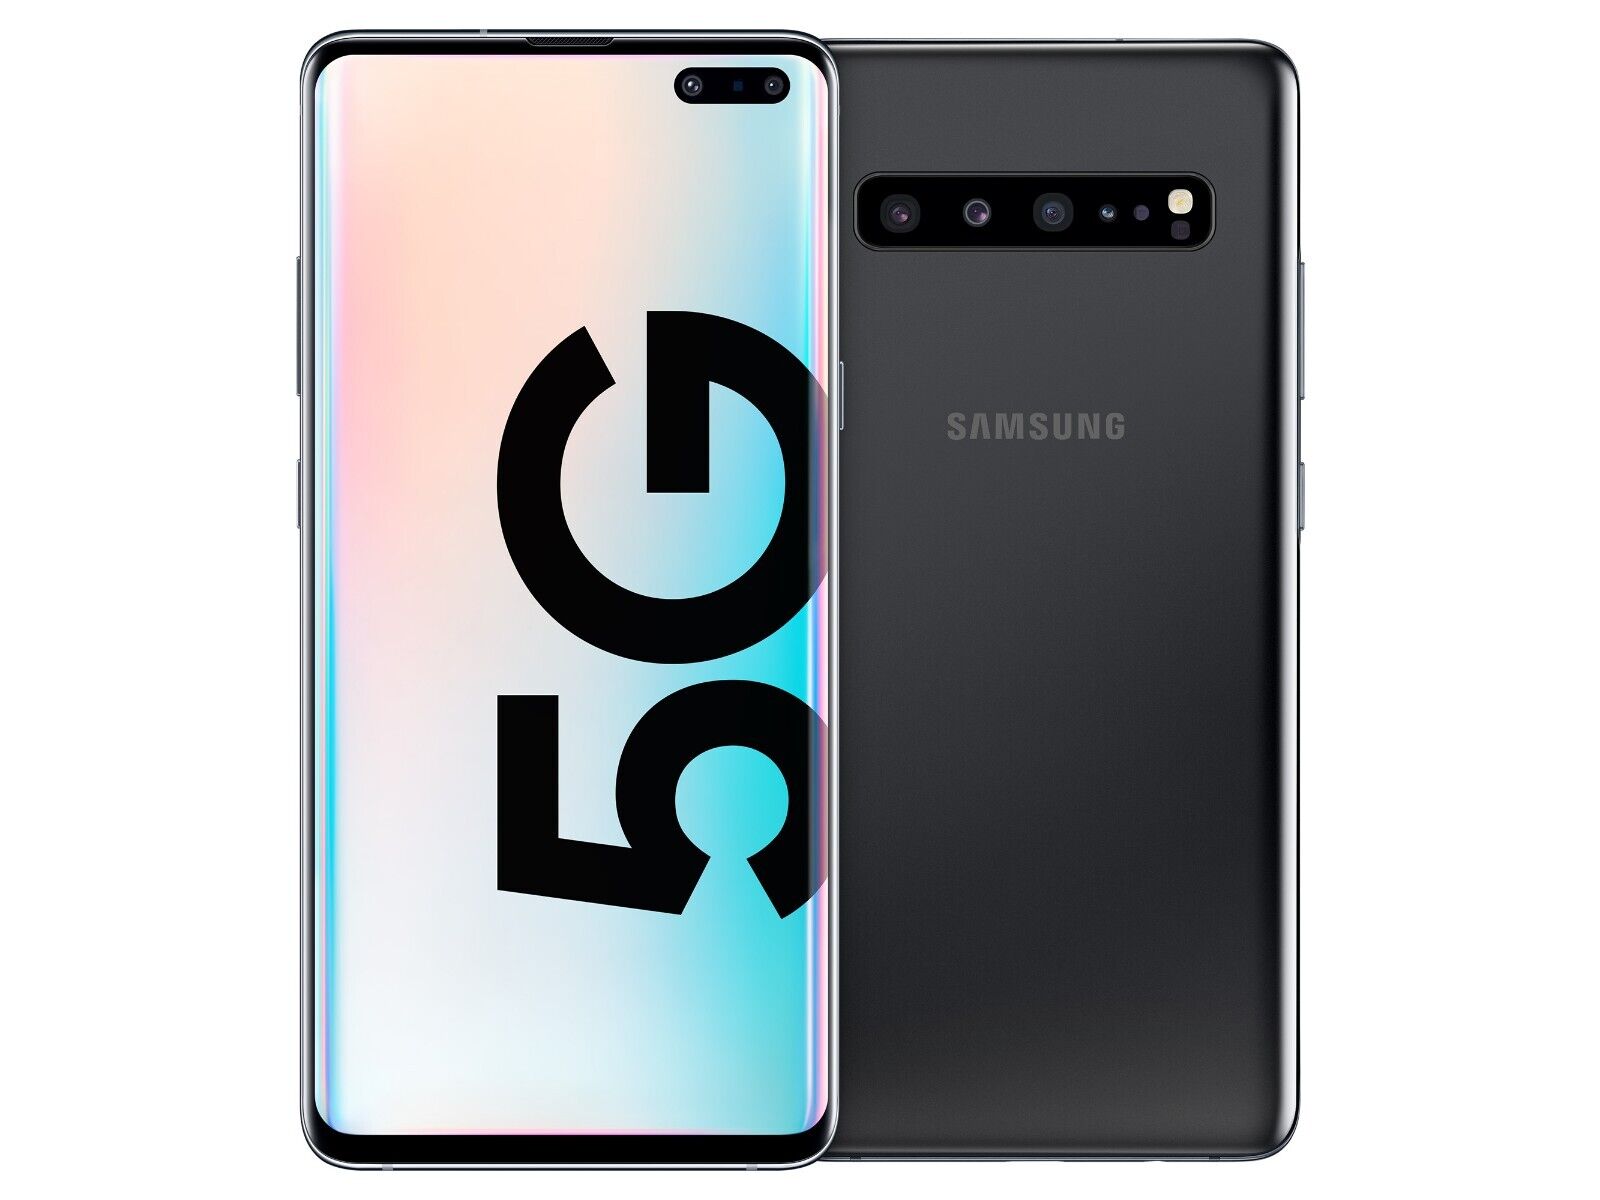 5g-testing-the-samsung-galaxy-s10-5g-on-verizons-network-in-chicago